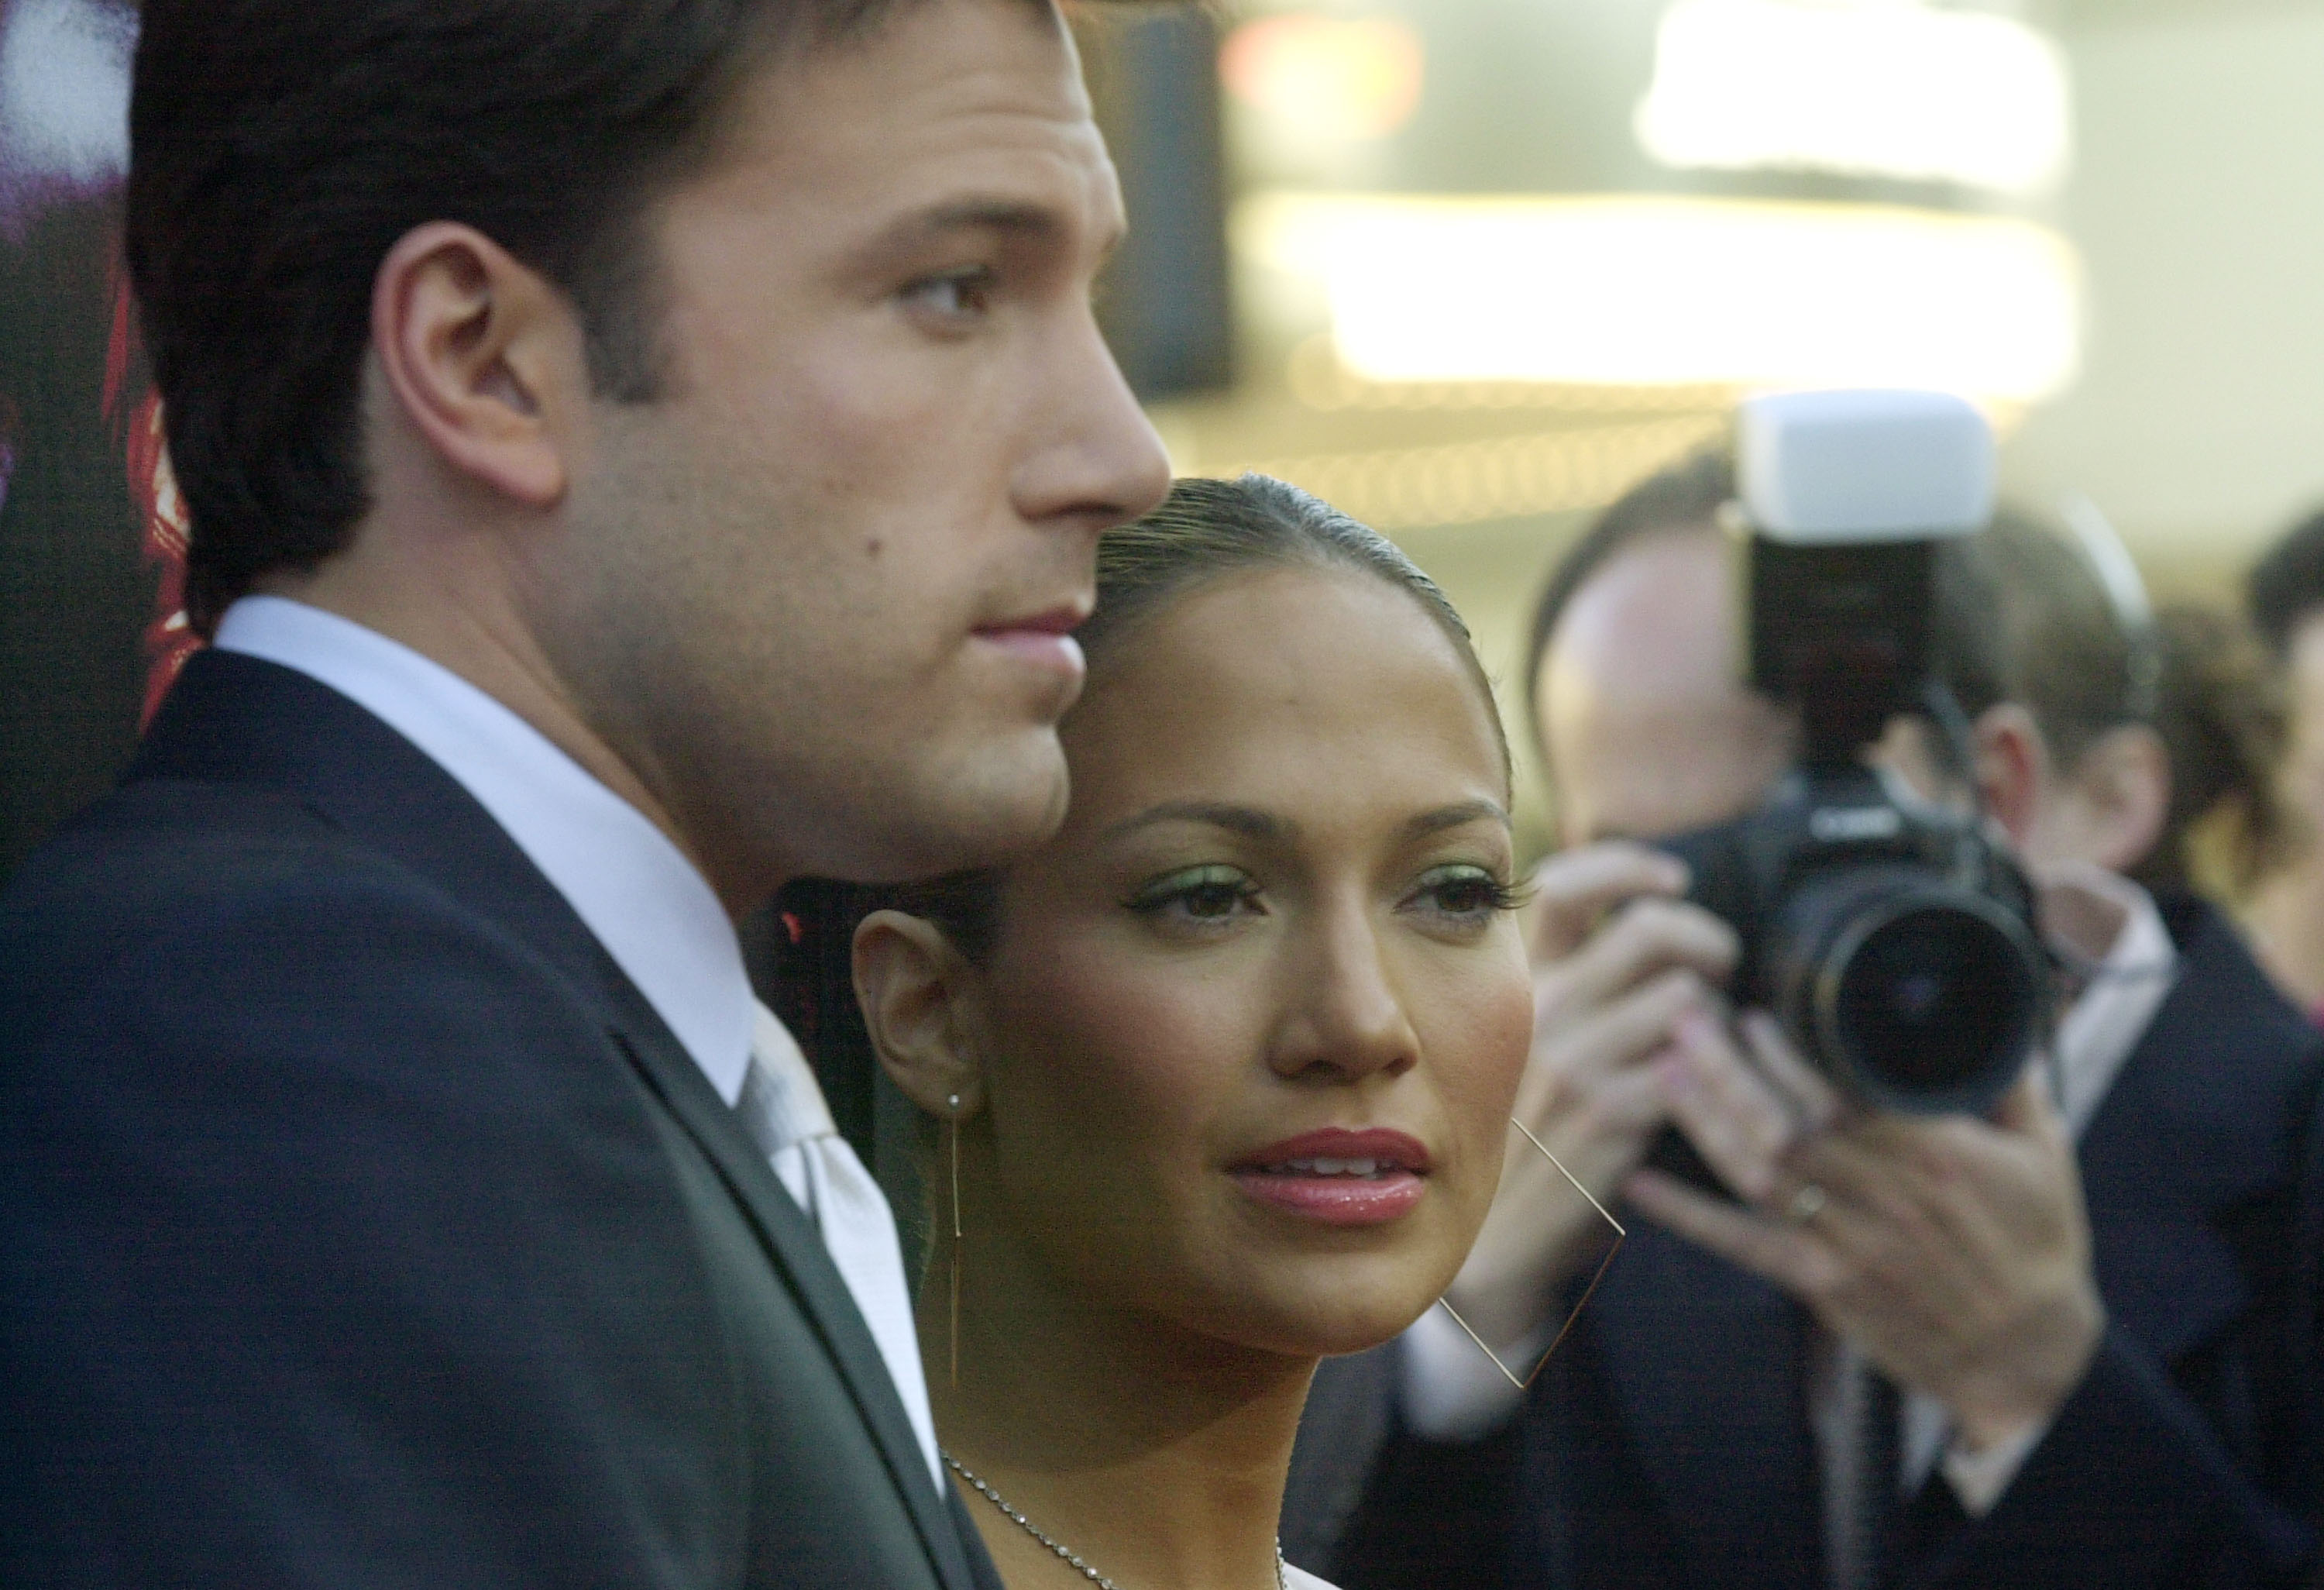 Jennifer Lopez and Ben Affleck during the "Daredevil" premiere at Mann Village Theatre in Westwood, California. | Source: Getty Images